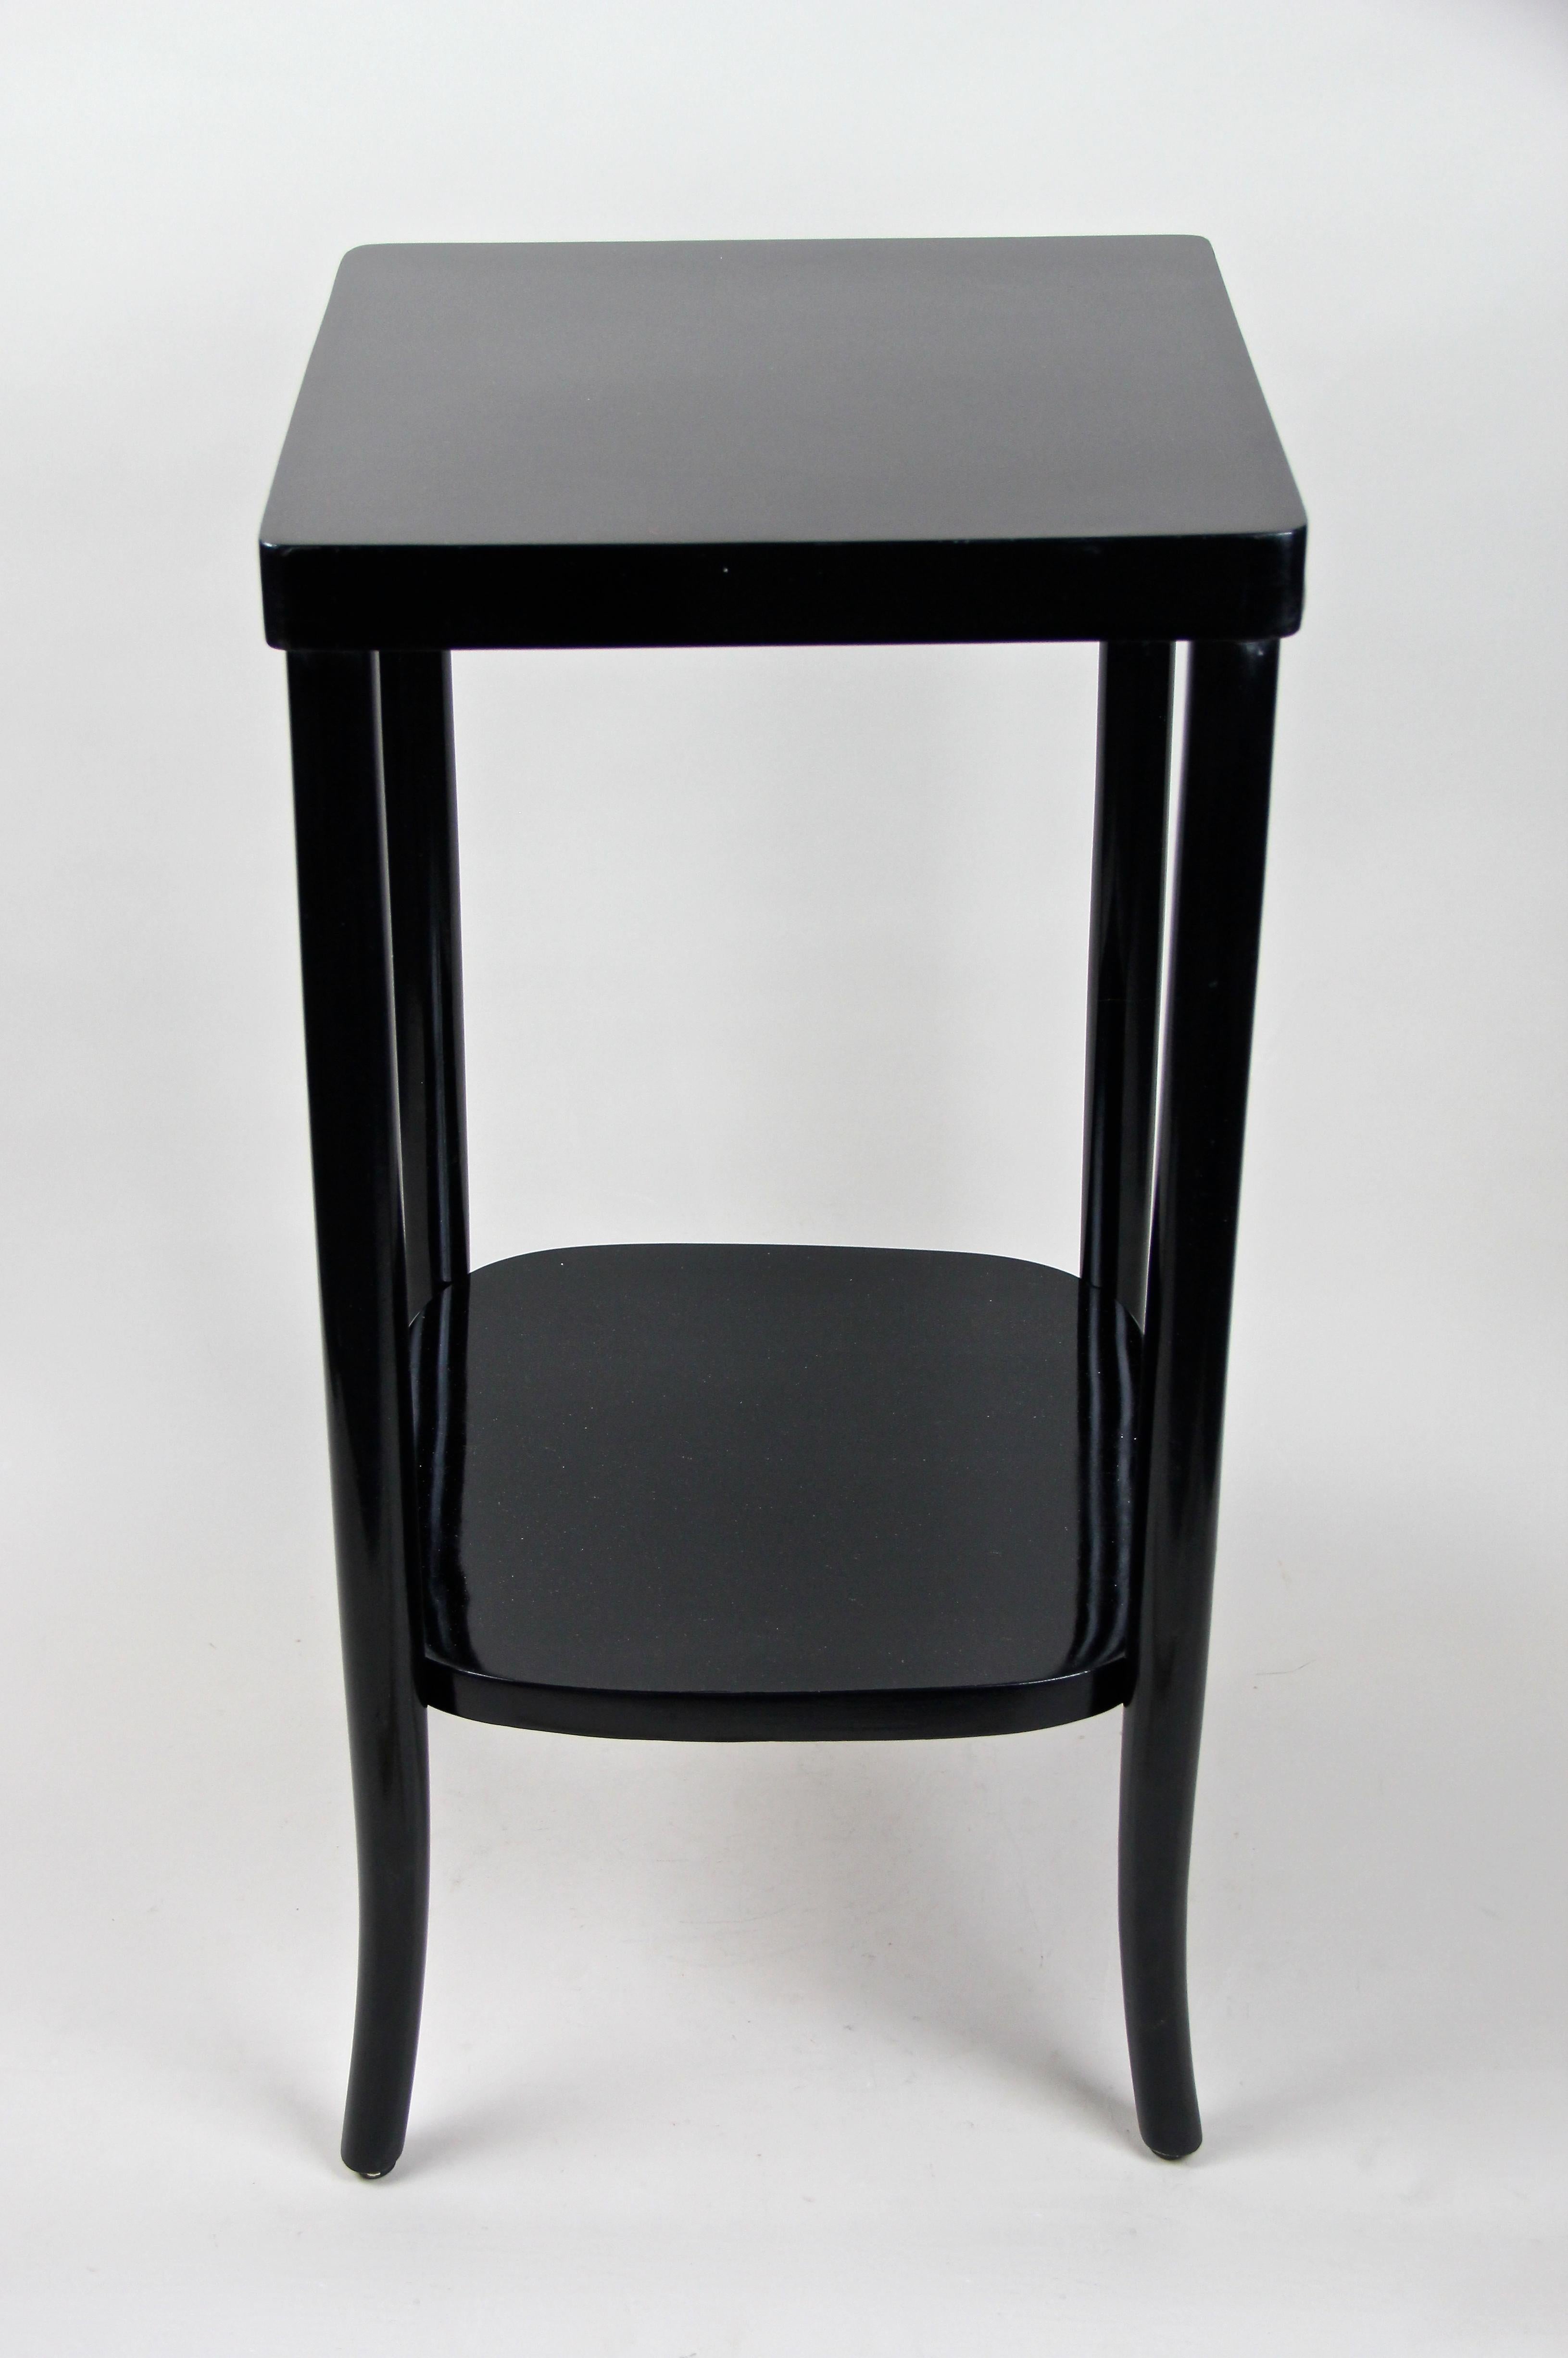 Ebonized Art Nouveau side table or pedestal by the famous company of D.G. Fischel circa 1910. Another great piece of Fischel with timeless design and two levels floating between four columns that are running lightly outwards toward the ground. The